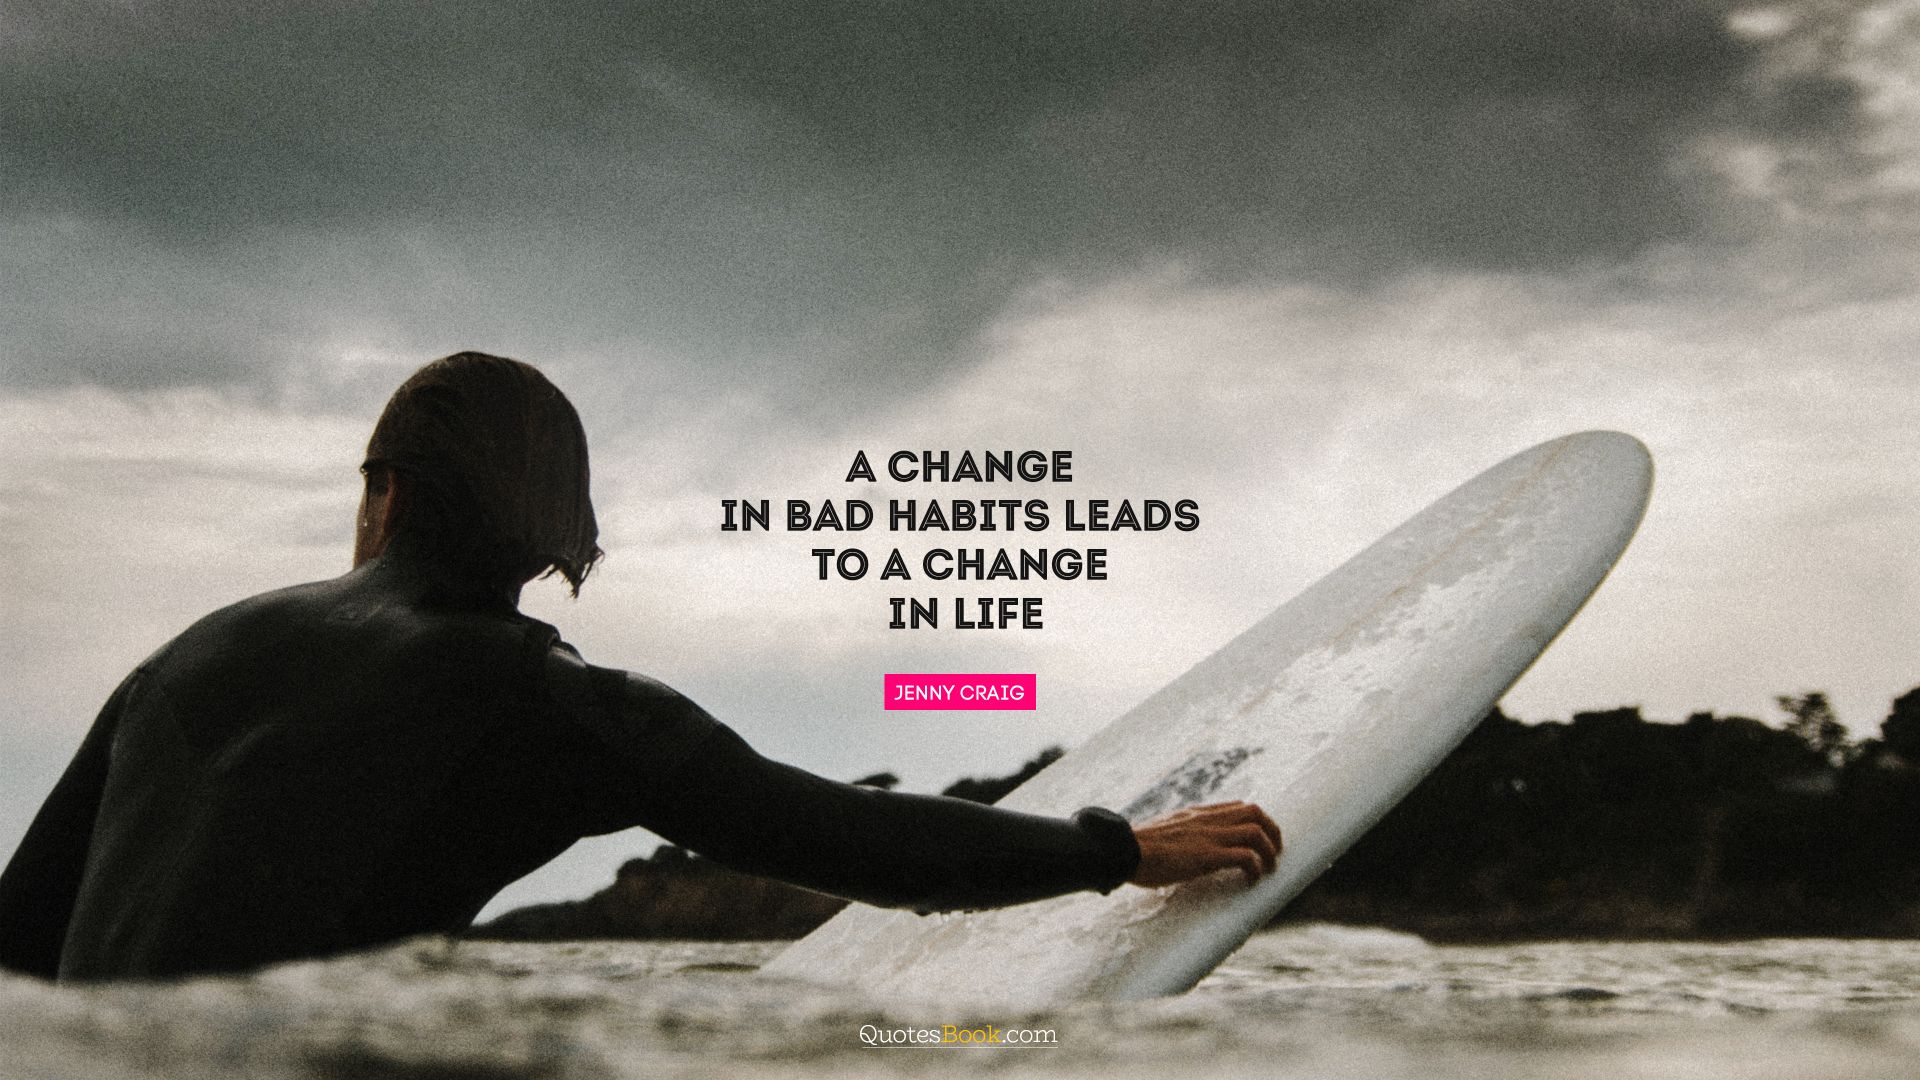 A change in bad habits leads to a change in life. - Quote by Jenny Craig